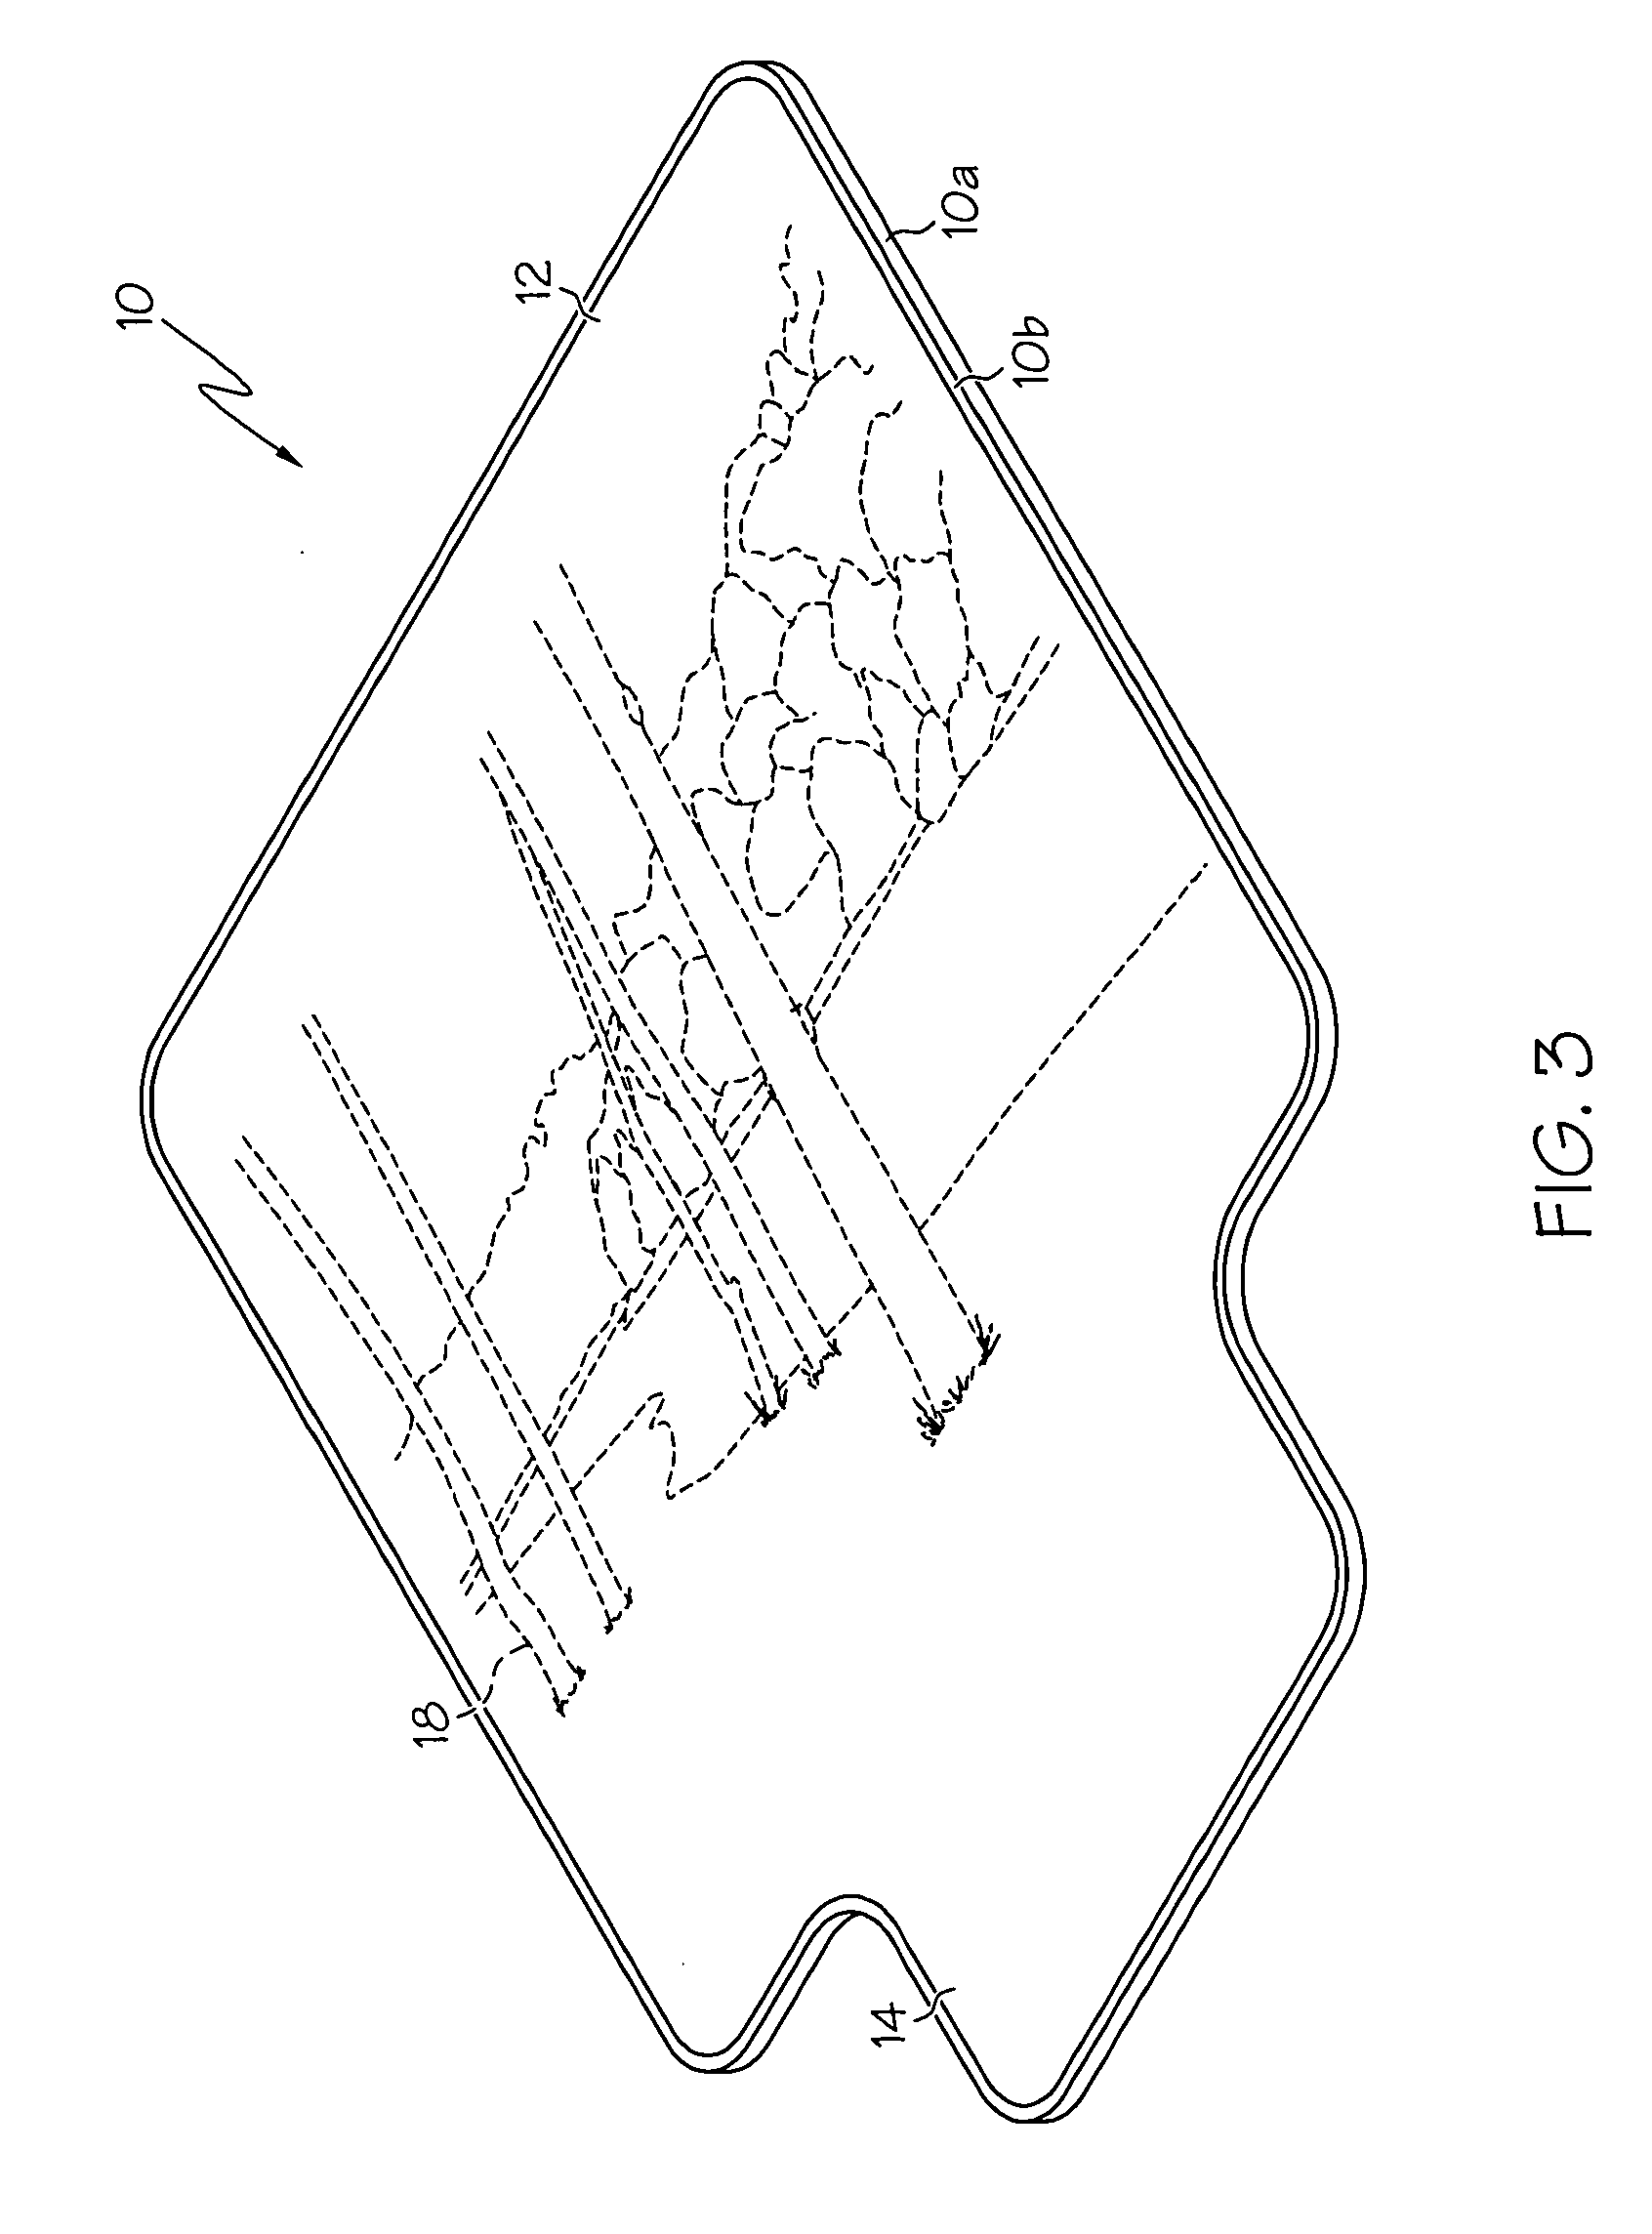 Graphic mat and method of producing the same